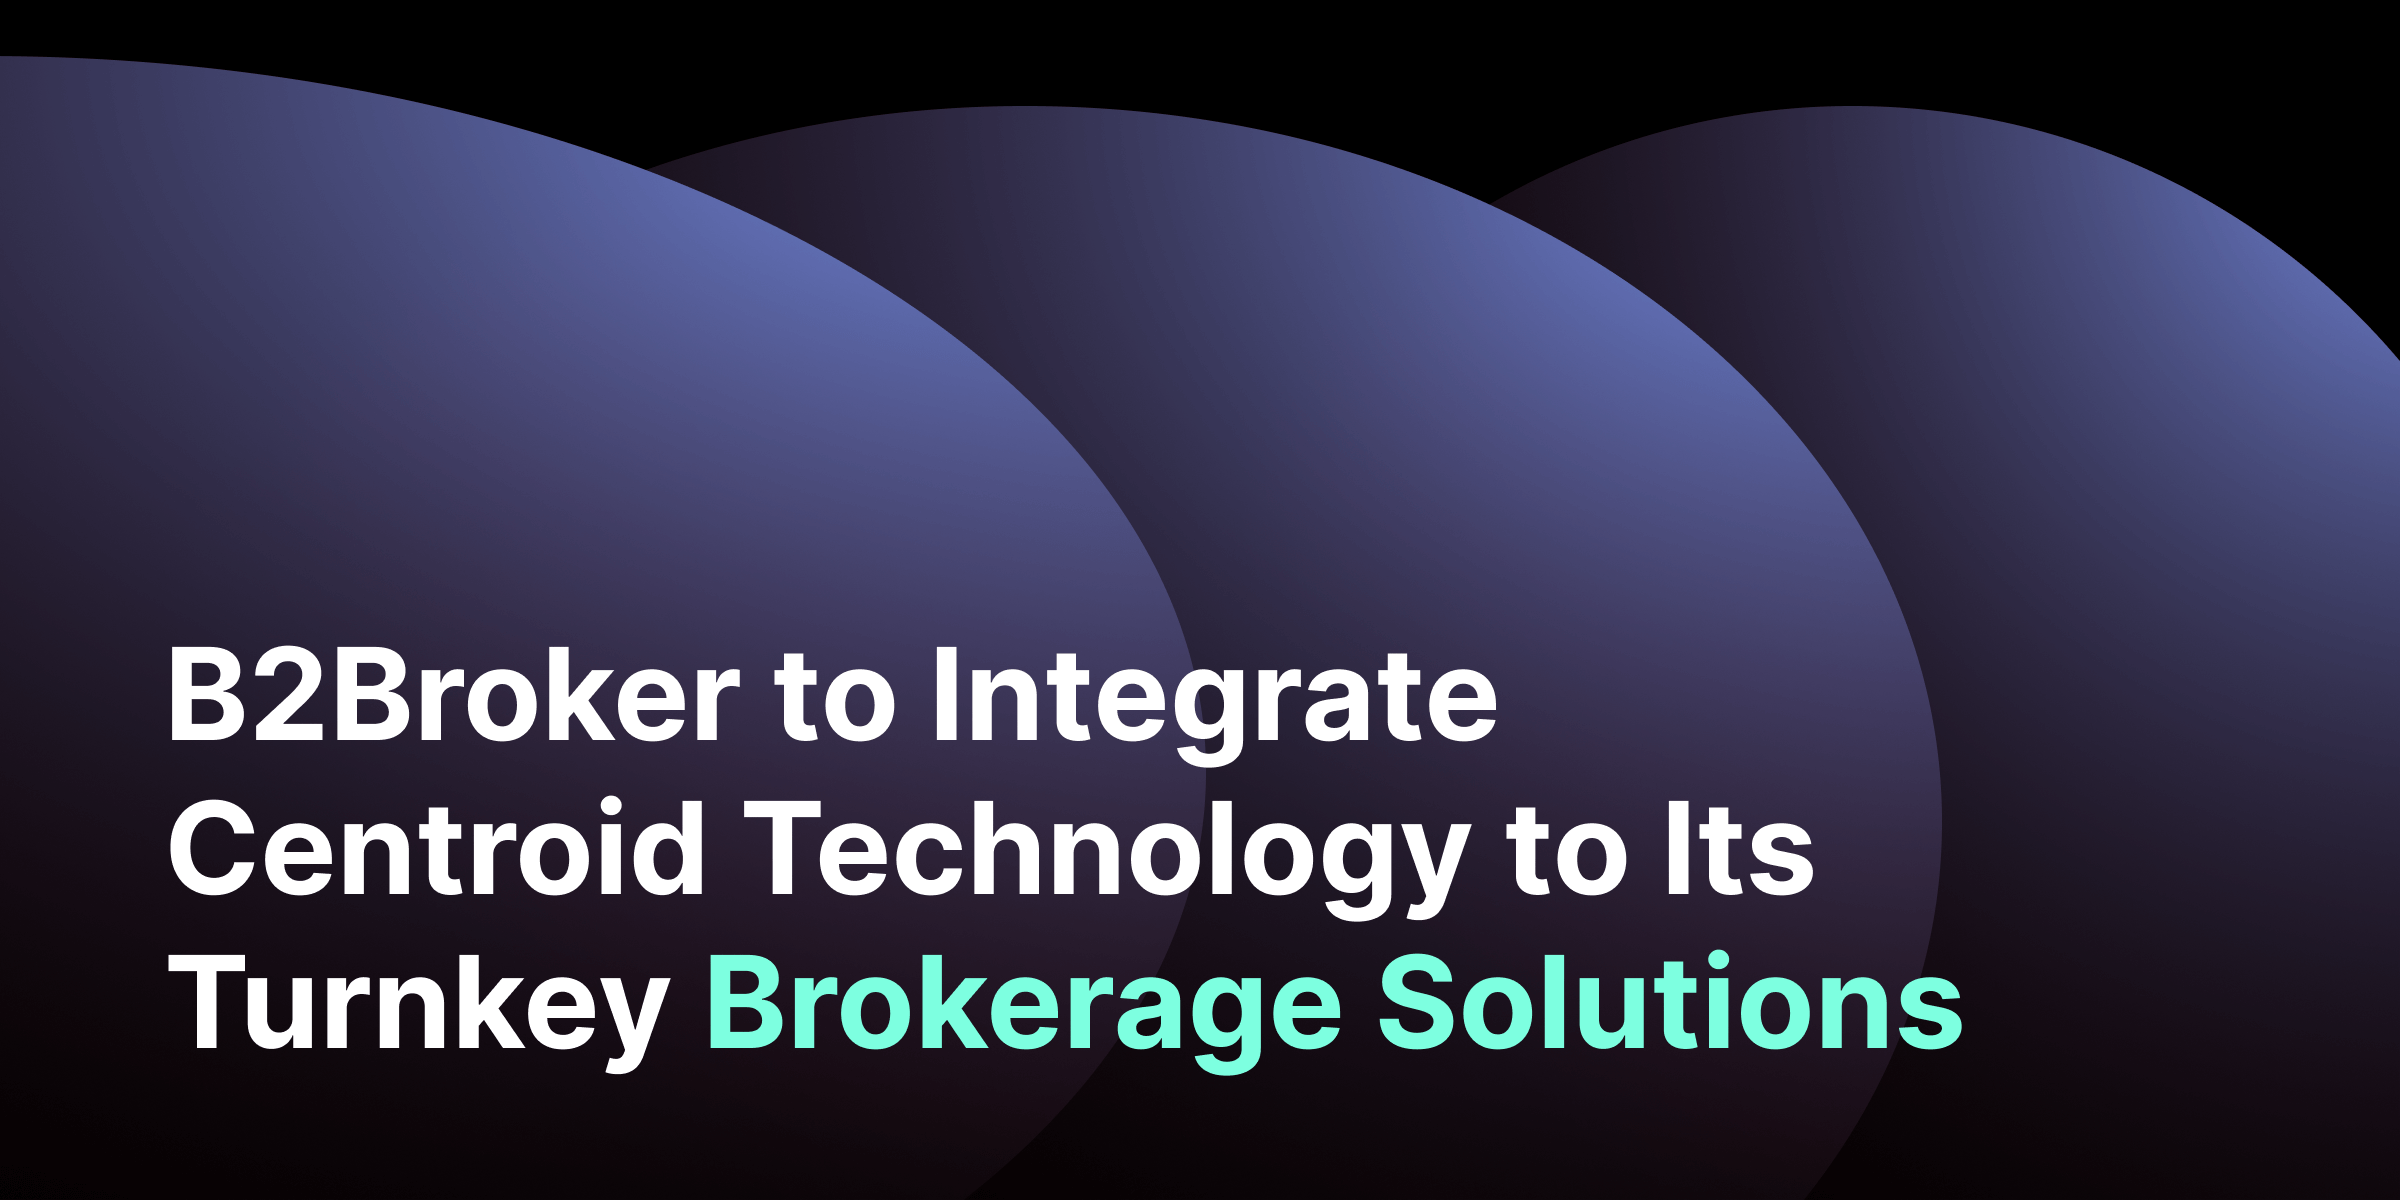 B2Broker Implementing Centroid Technology As Part Of Its Turnkey Brokerage Solutions